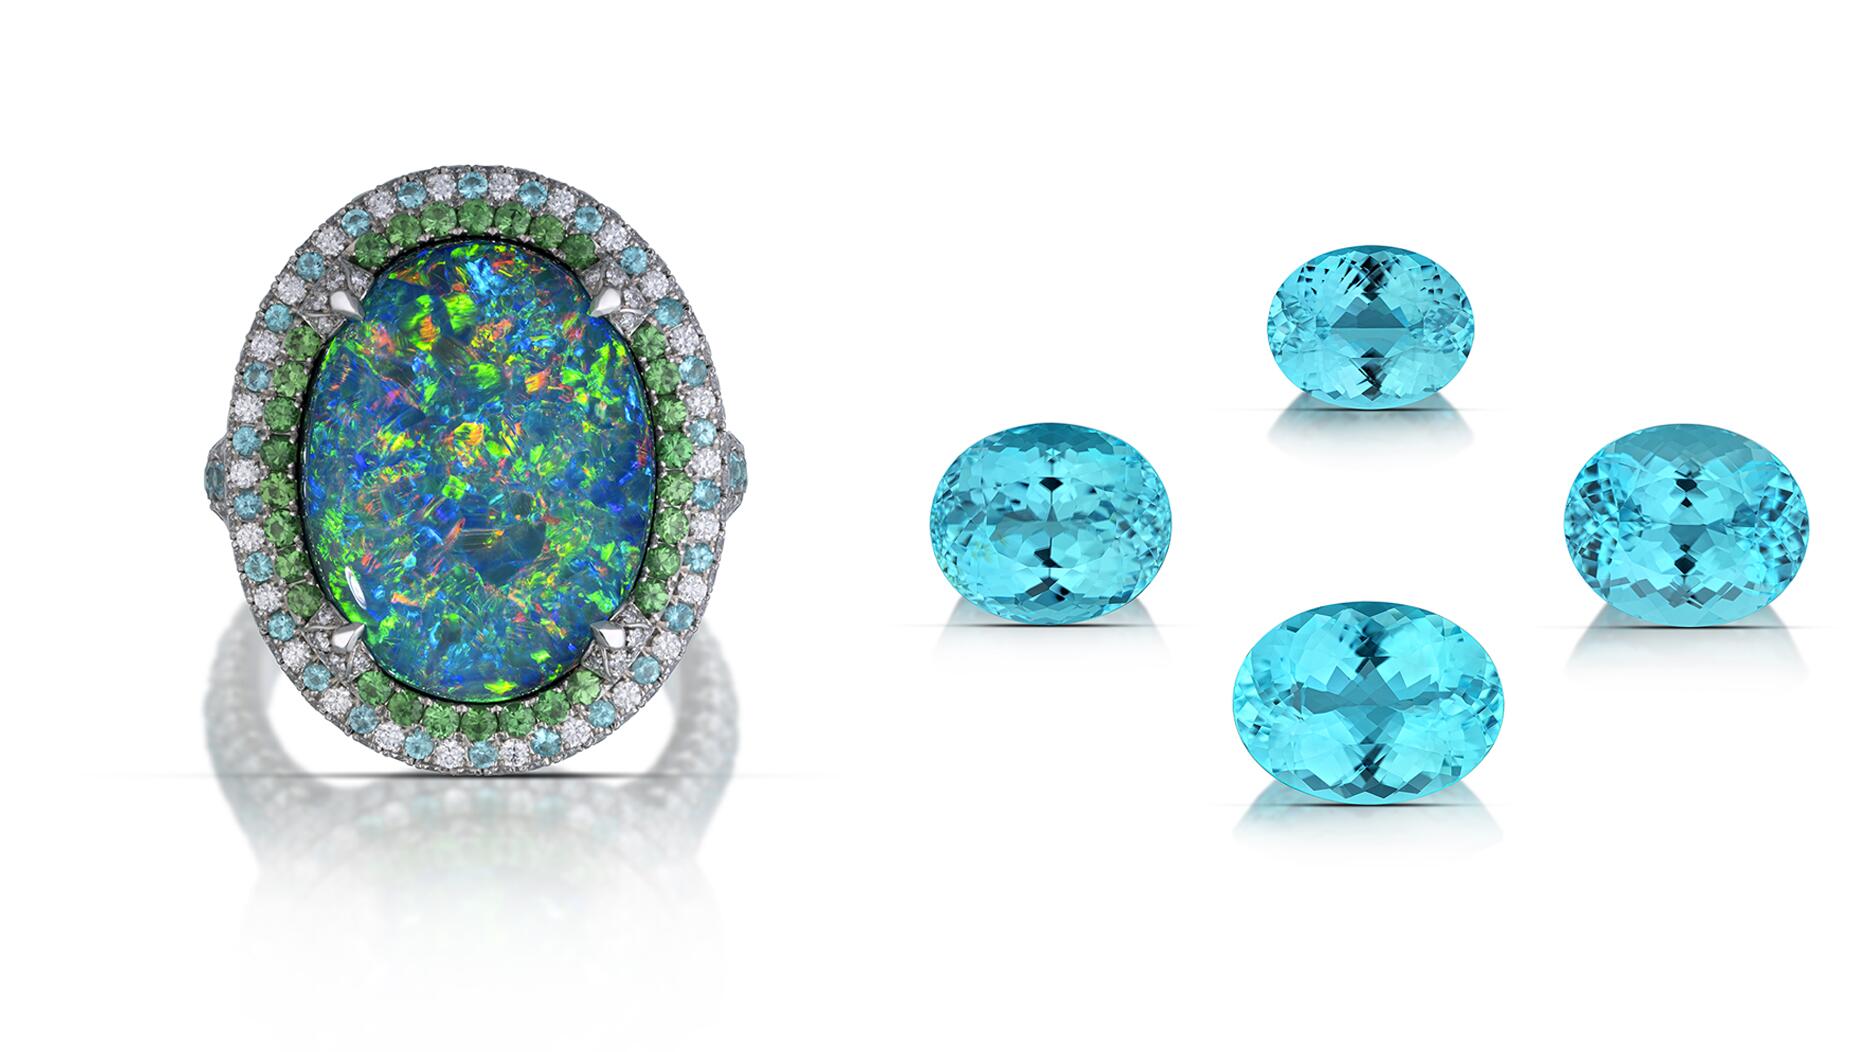 Omi Privé black opal platinum ring and a suite of four oval Paraíba-type tourmalines